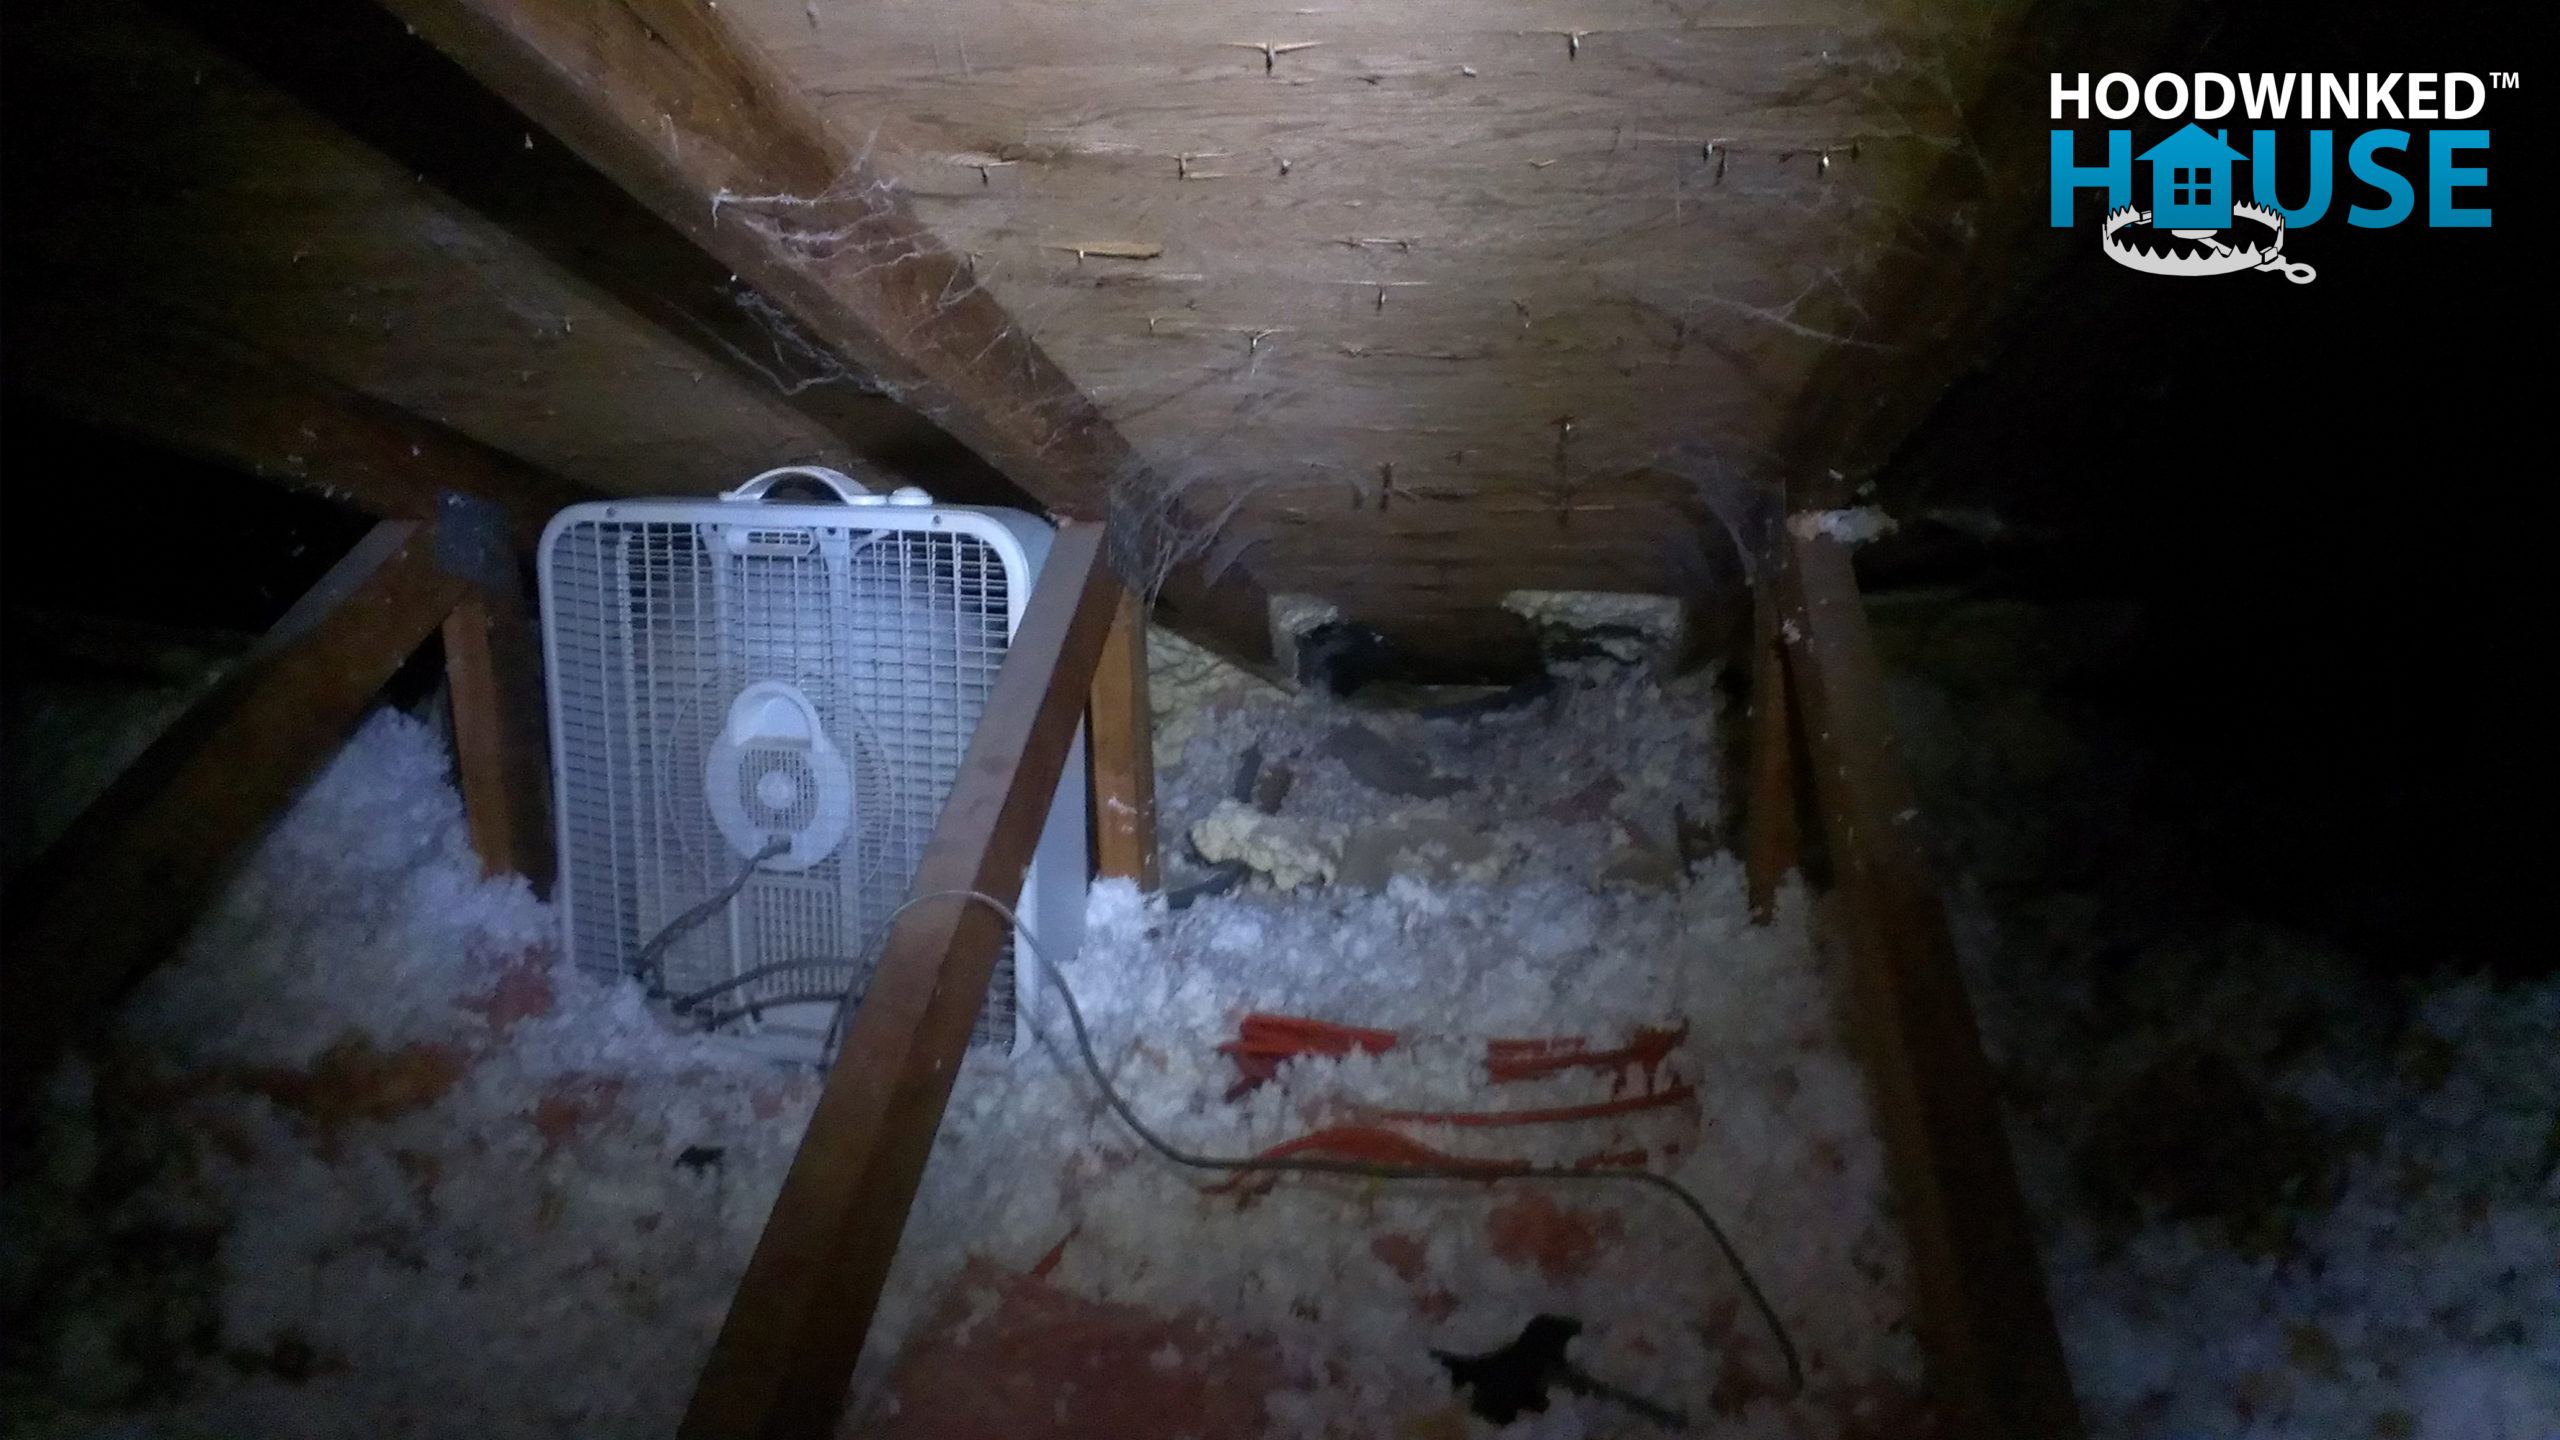 A box fan in an attic keeps ice dams frozen until the damage can be repaired in warmer weather.